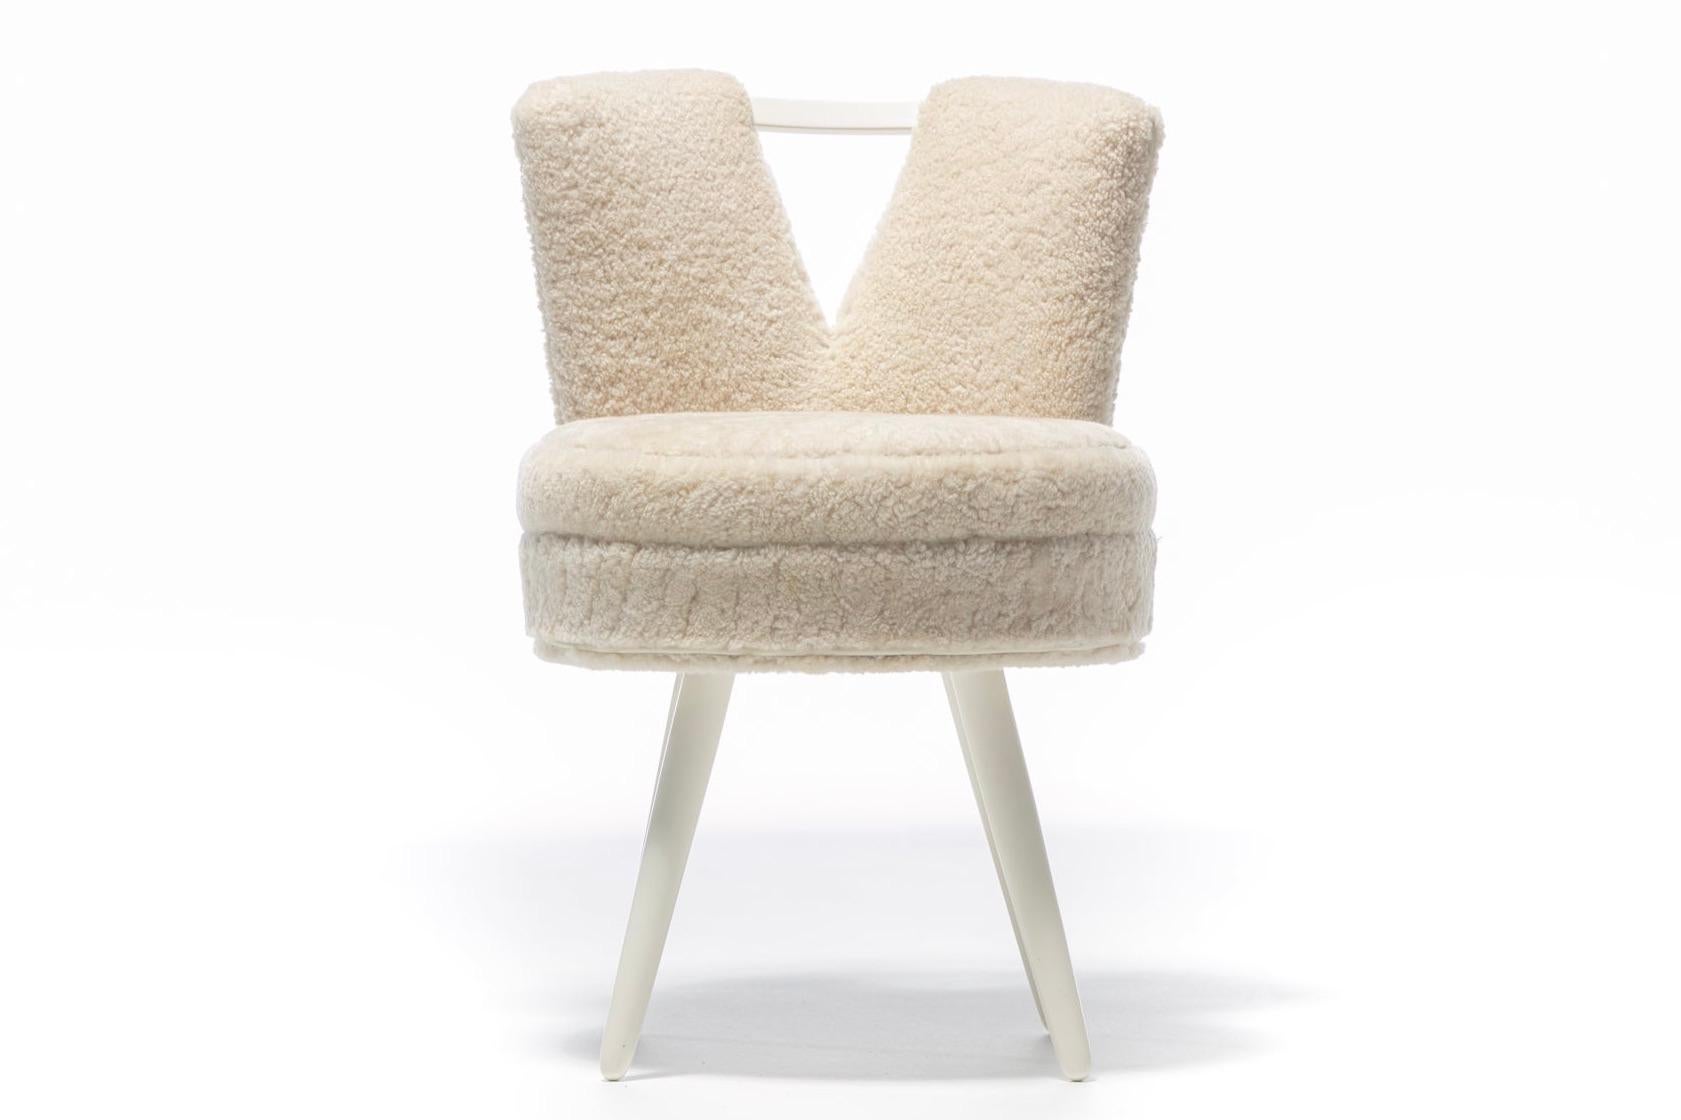 Hide Custom Vanity Stool in Ivory Cream Shearling with Leather Trim